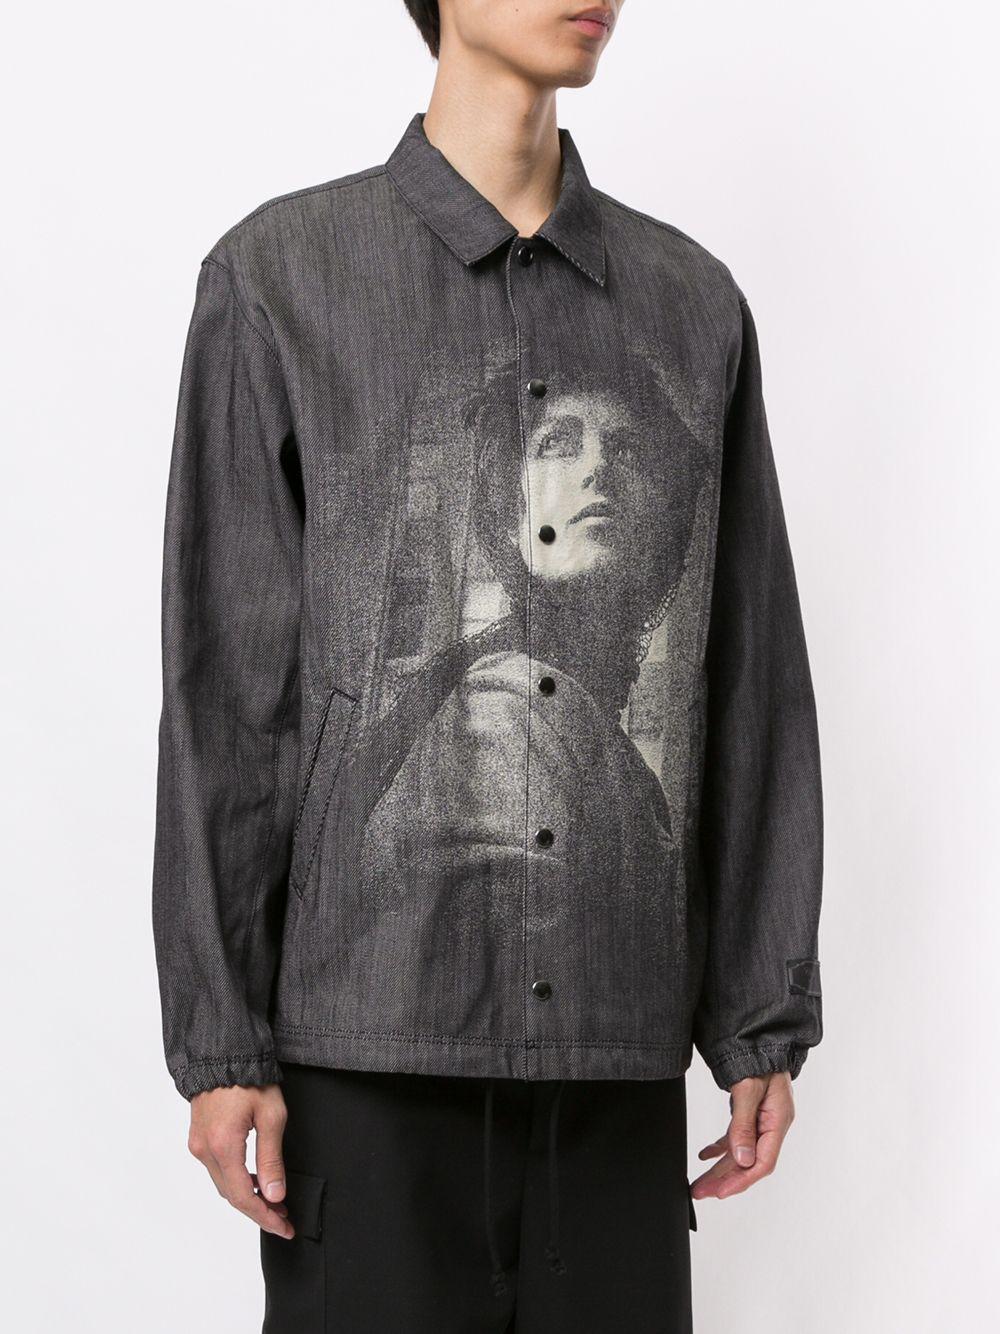 Undercover X Cindy Sherman Printed Shirt Jacket in Black for Men